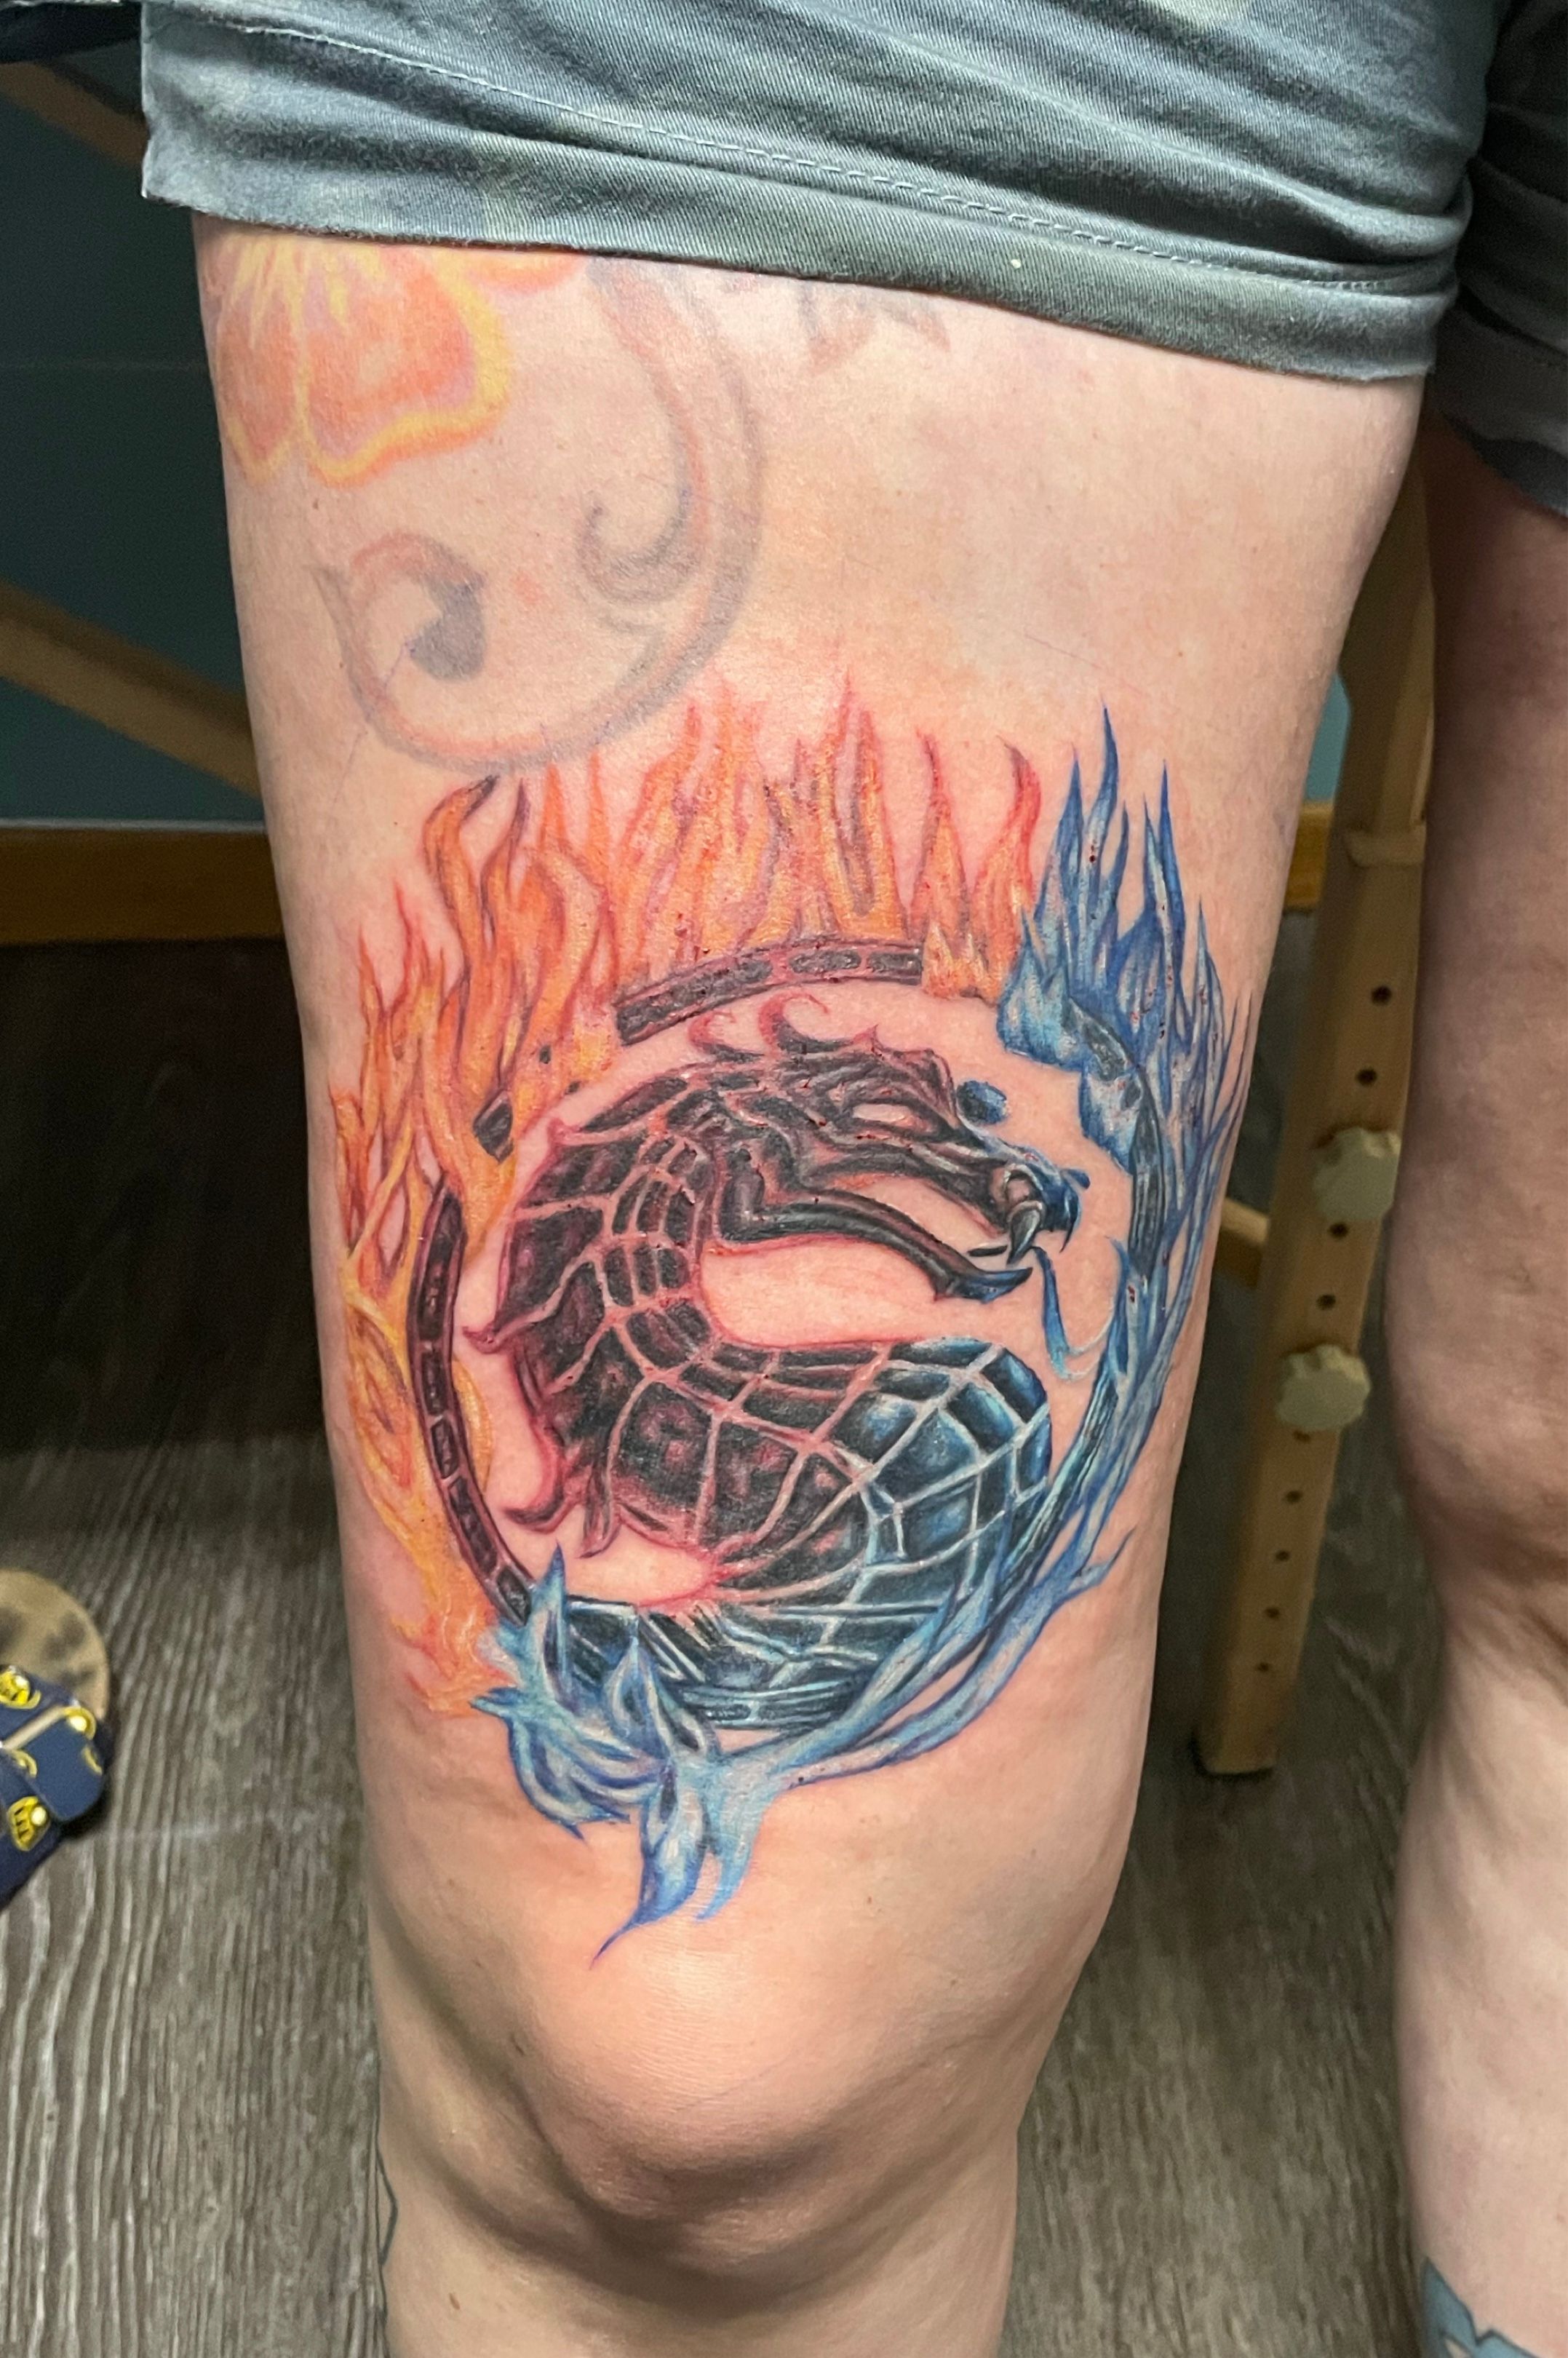 Queen of Steel Piercing and Tattoos  Mortal Kombat Tattoo for Chad   Tattooed by meoniawitch    MortalKombat MortalKombatTattoo  ScorpionMortalKombat ChestTattoo BlackAndGreyTattoo TattooOfTheDay  QueenOfSteel MeoniaWitch ILoveWhatIDo 